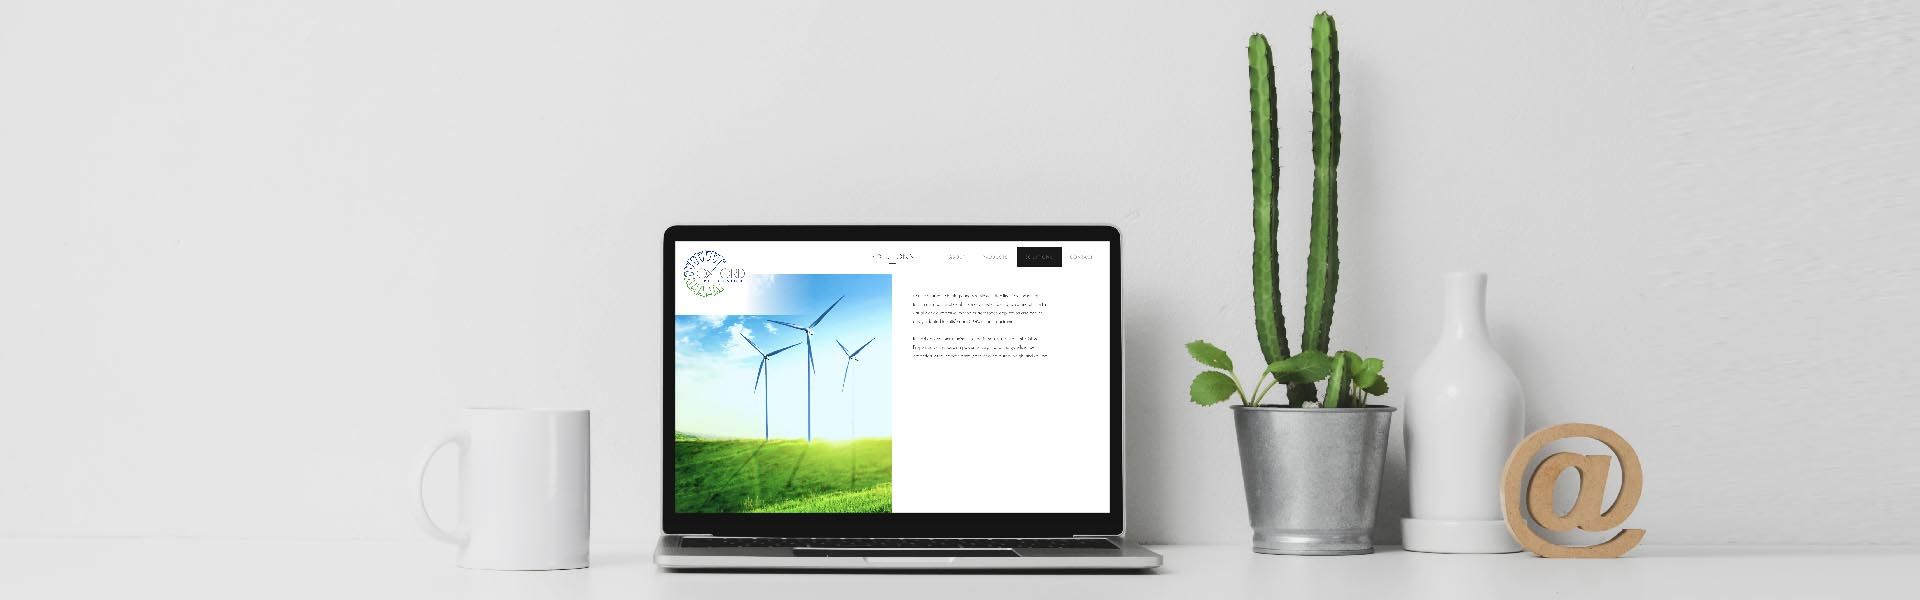 a laptop is open to a website page with a picture of electric wind turbines on it